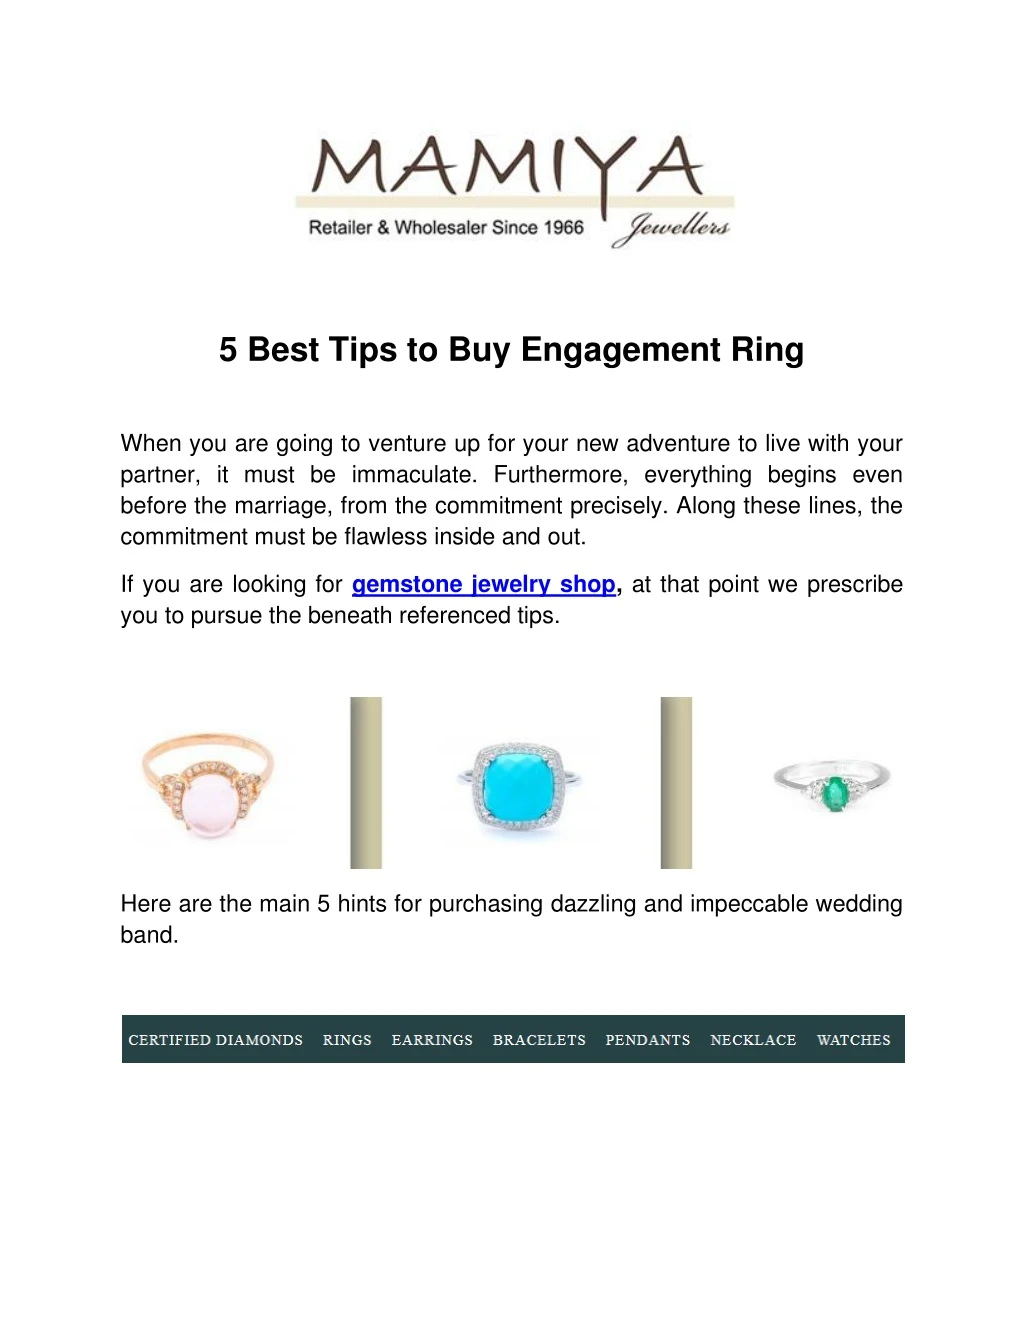 5 best tips to buy engagement ring